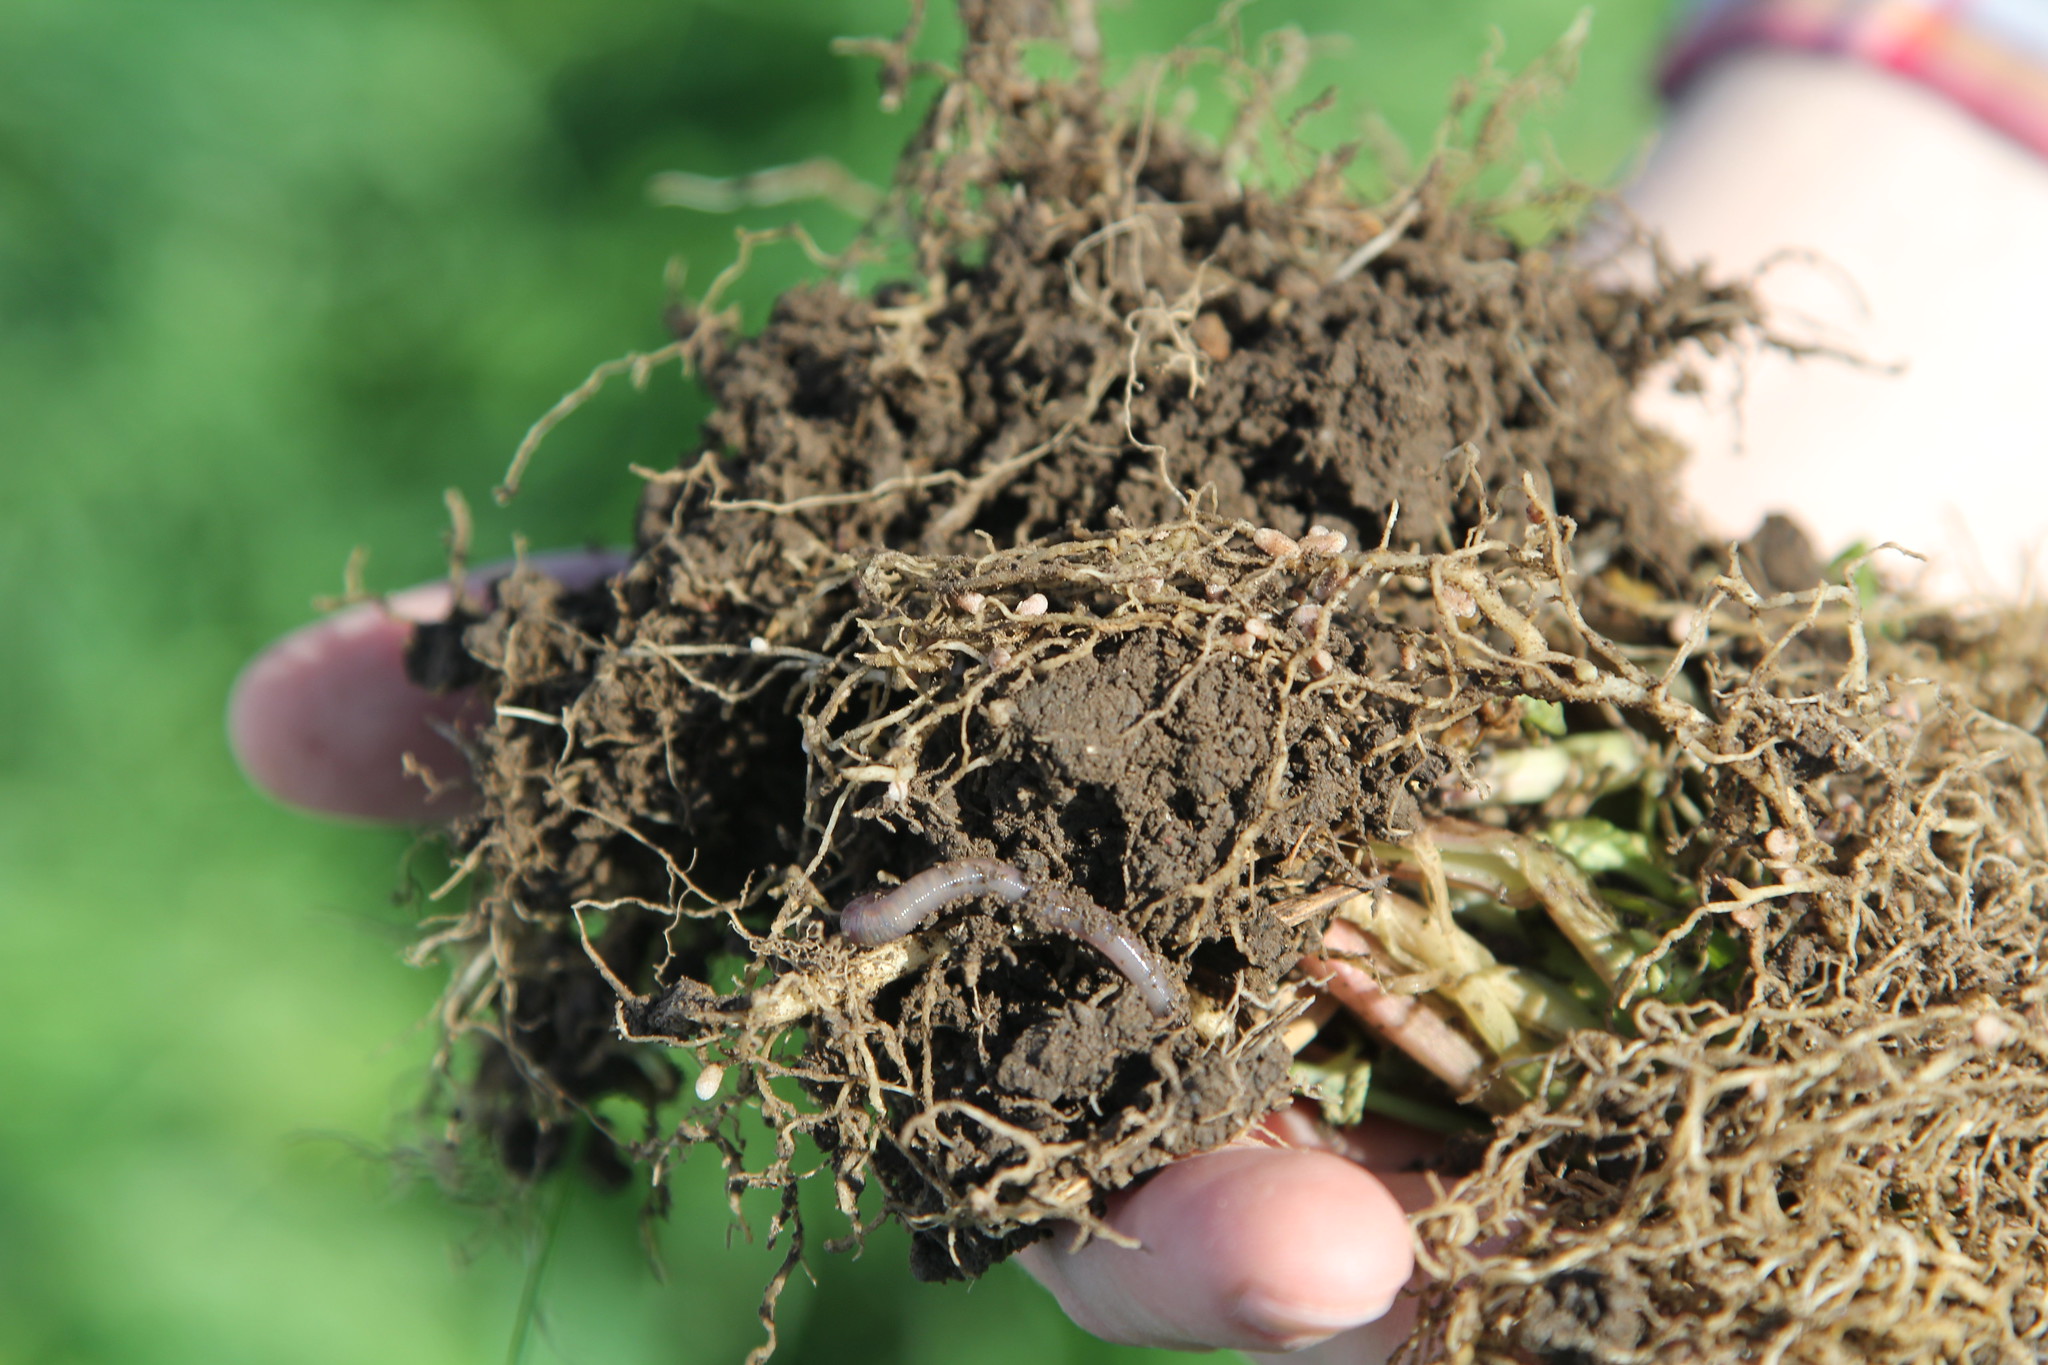 The soil on Kenneth Jensen's farm is a perfect example of healthy, high-performing microbiology. It's full of tiny, round  